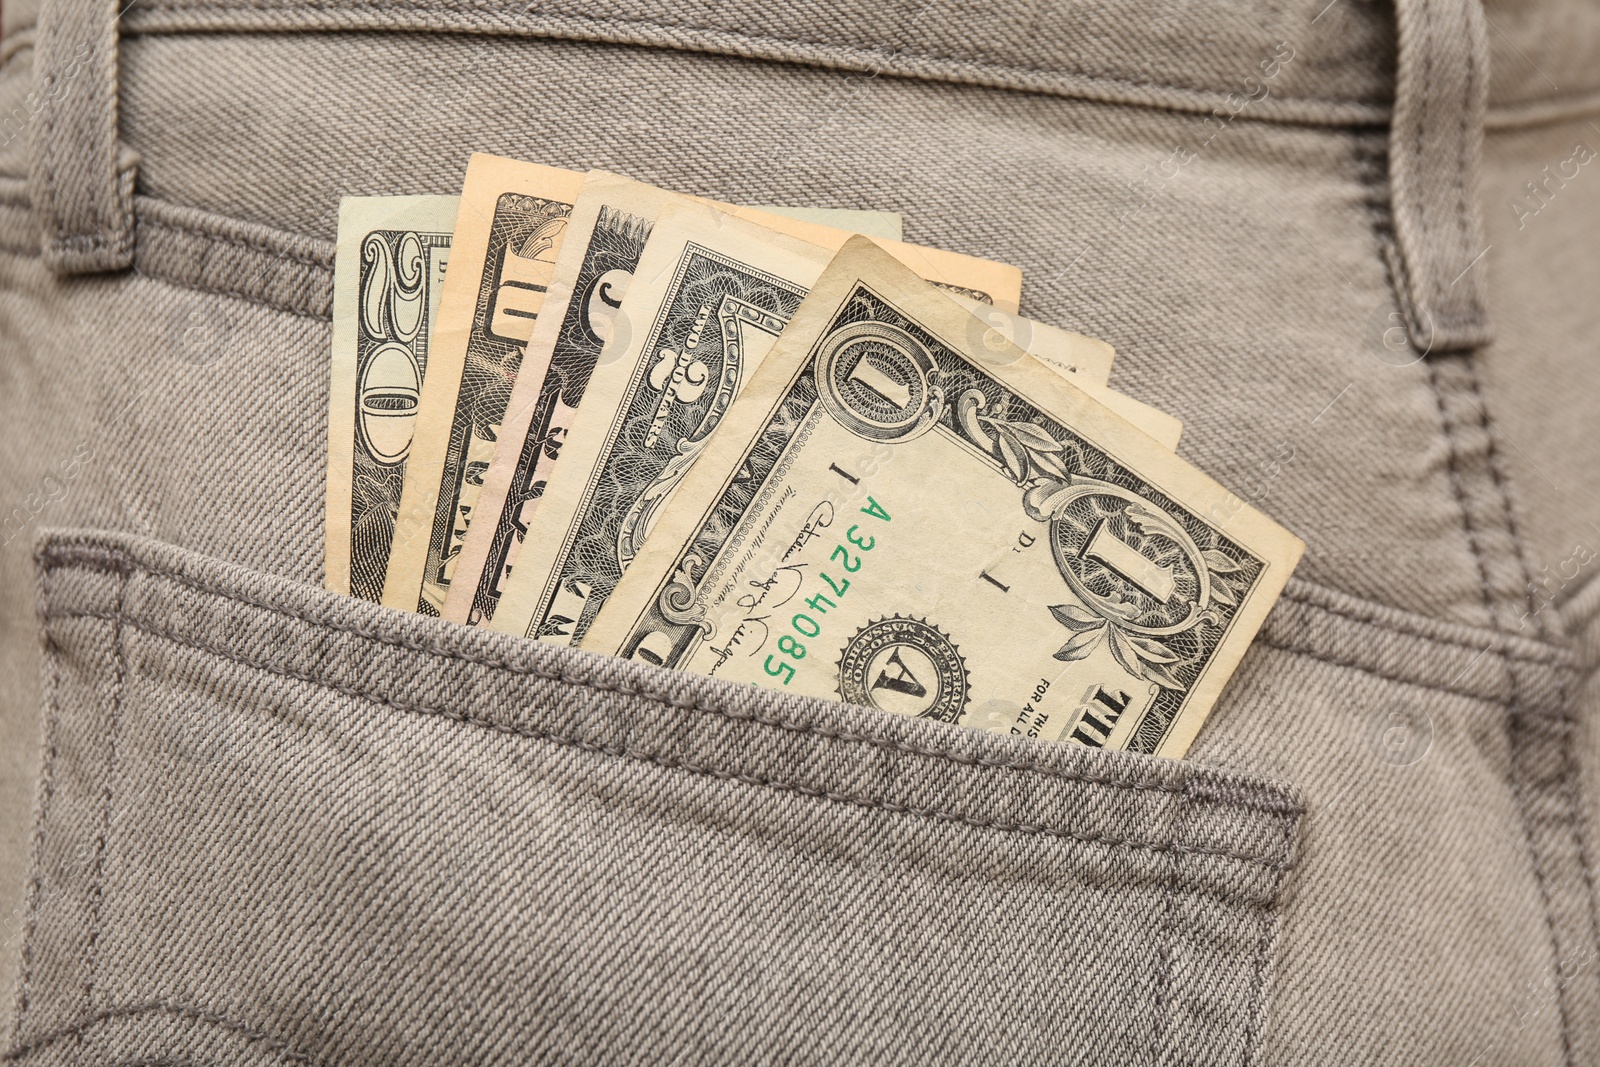 Photo of Dollar banknotes in pocket of grey jeans, closeup. Spending money